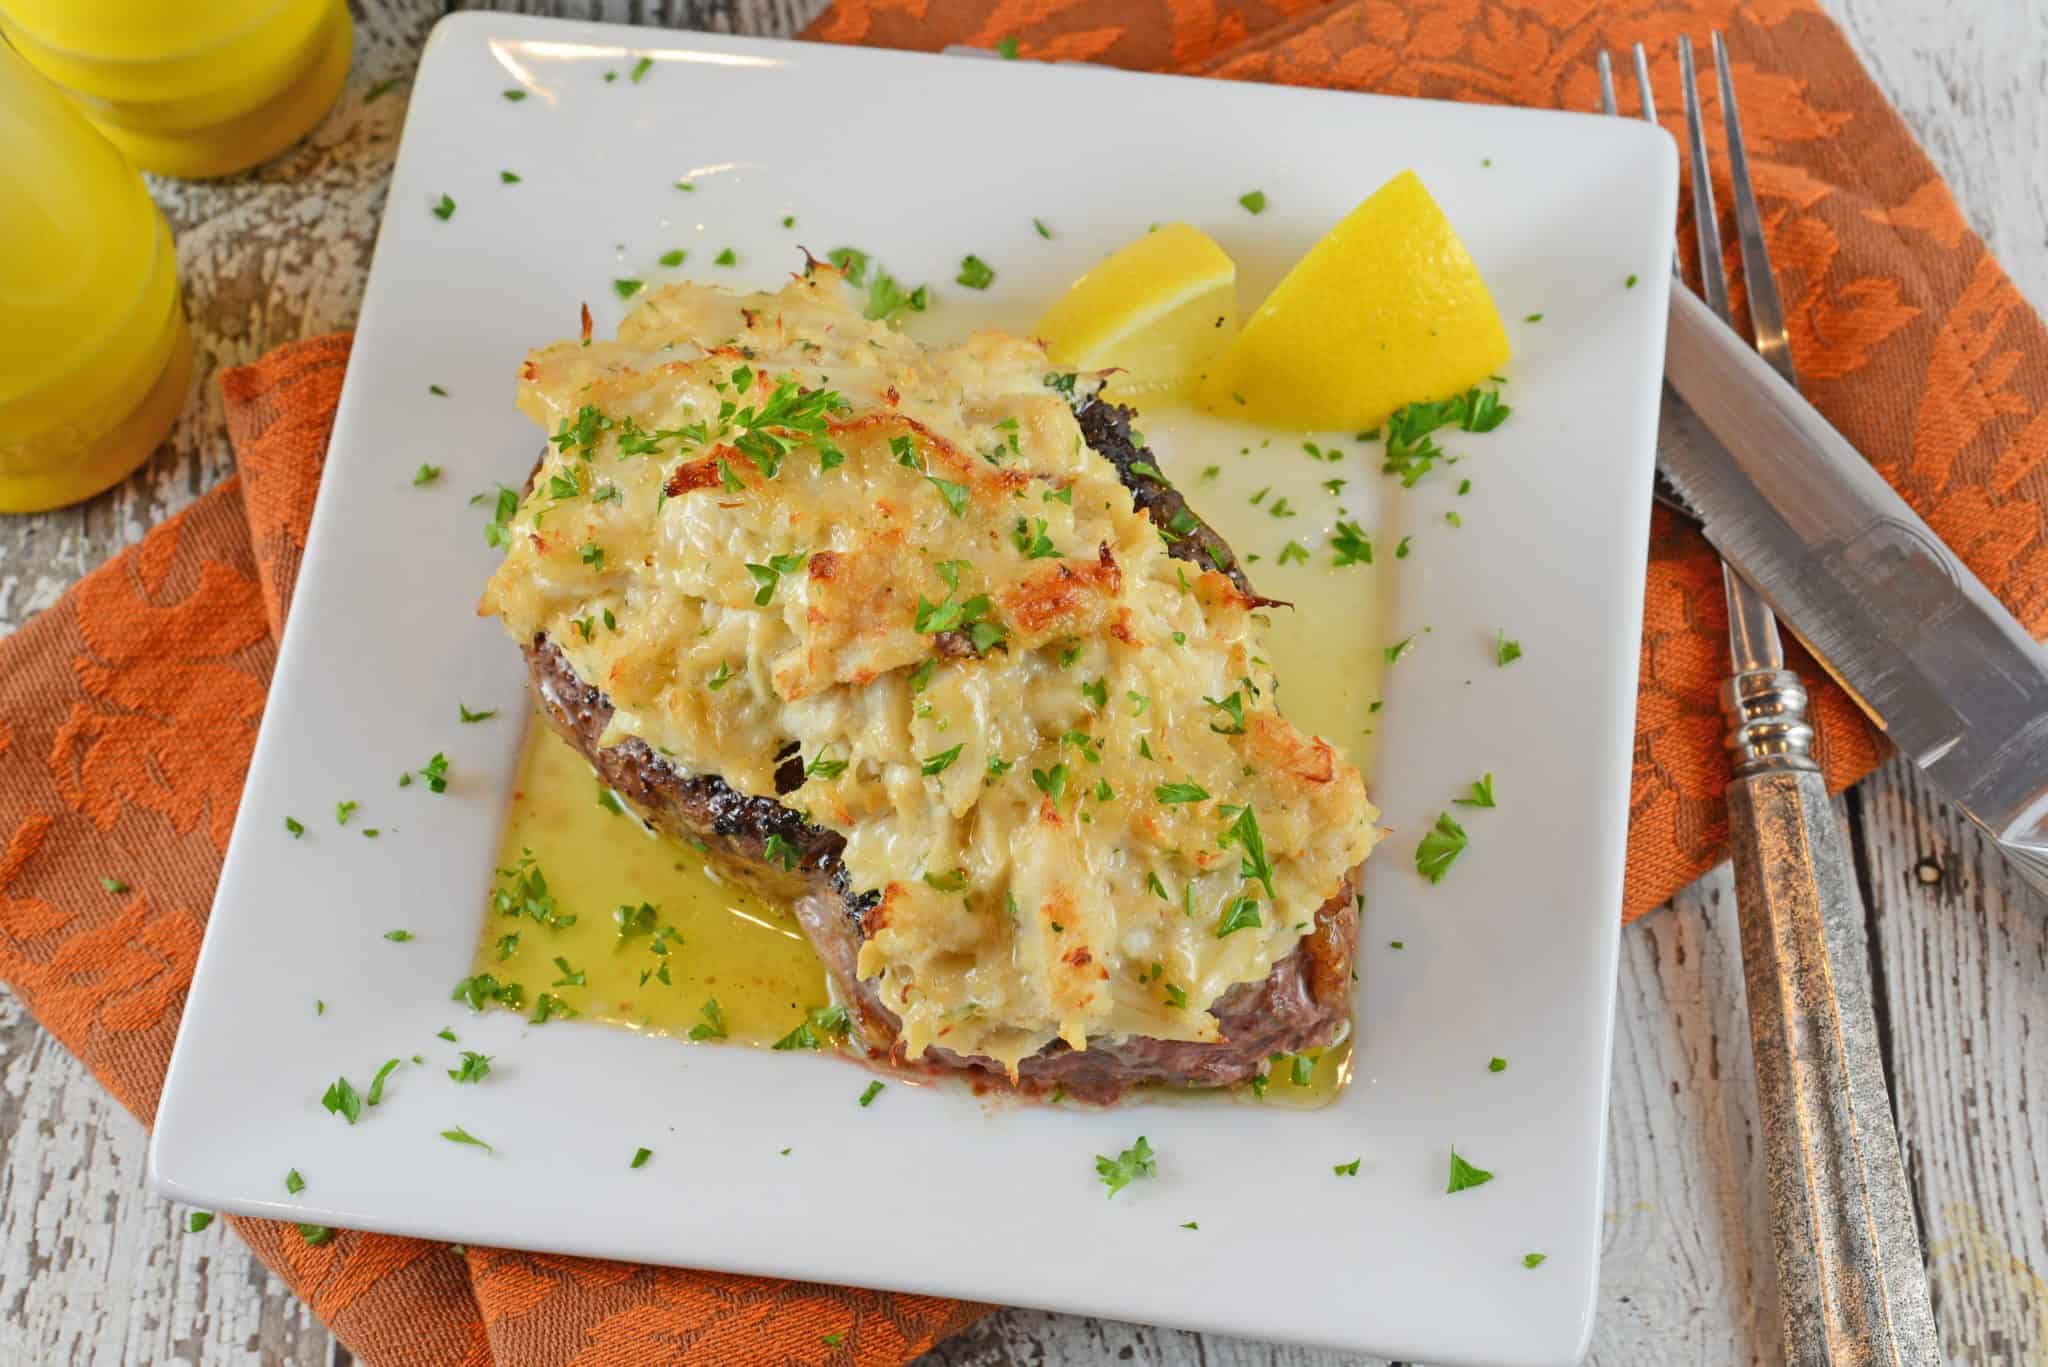 Crab Imperial Filet Mignon is an easy dish perfect for special occasions! Tender beef topped with buttery crab! A luscious crab recipe! #crabtoppingforsteak #crabimperialrecipe #filetmignon www.savoryexperiments.com